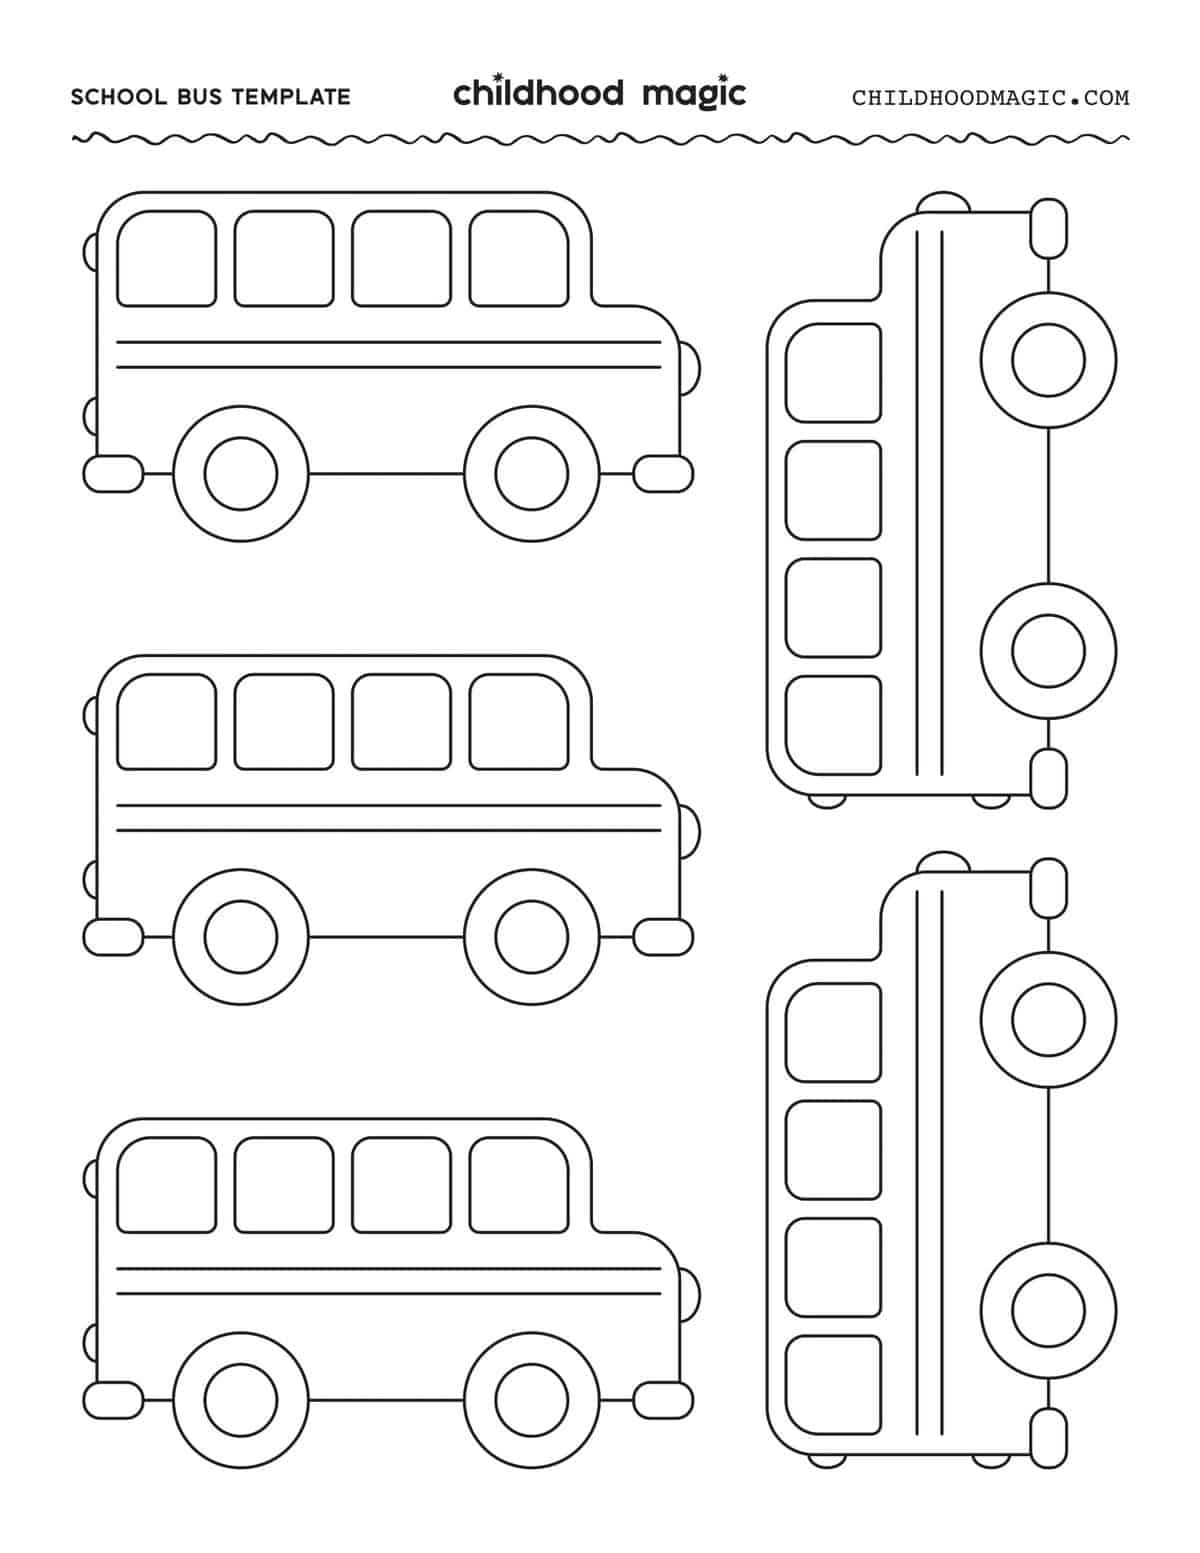 School Bus Template Free Printable and a Bus Craft